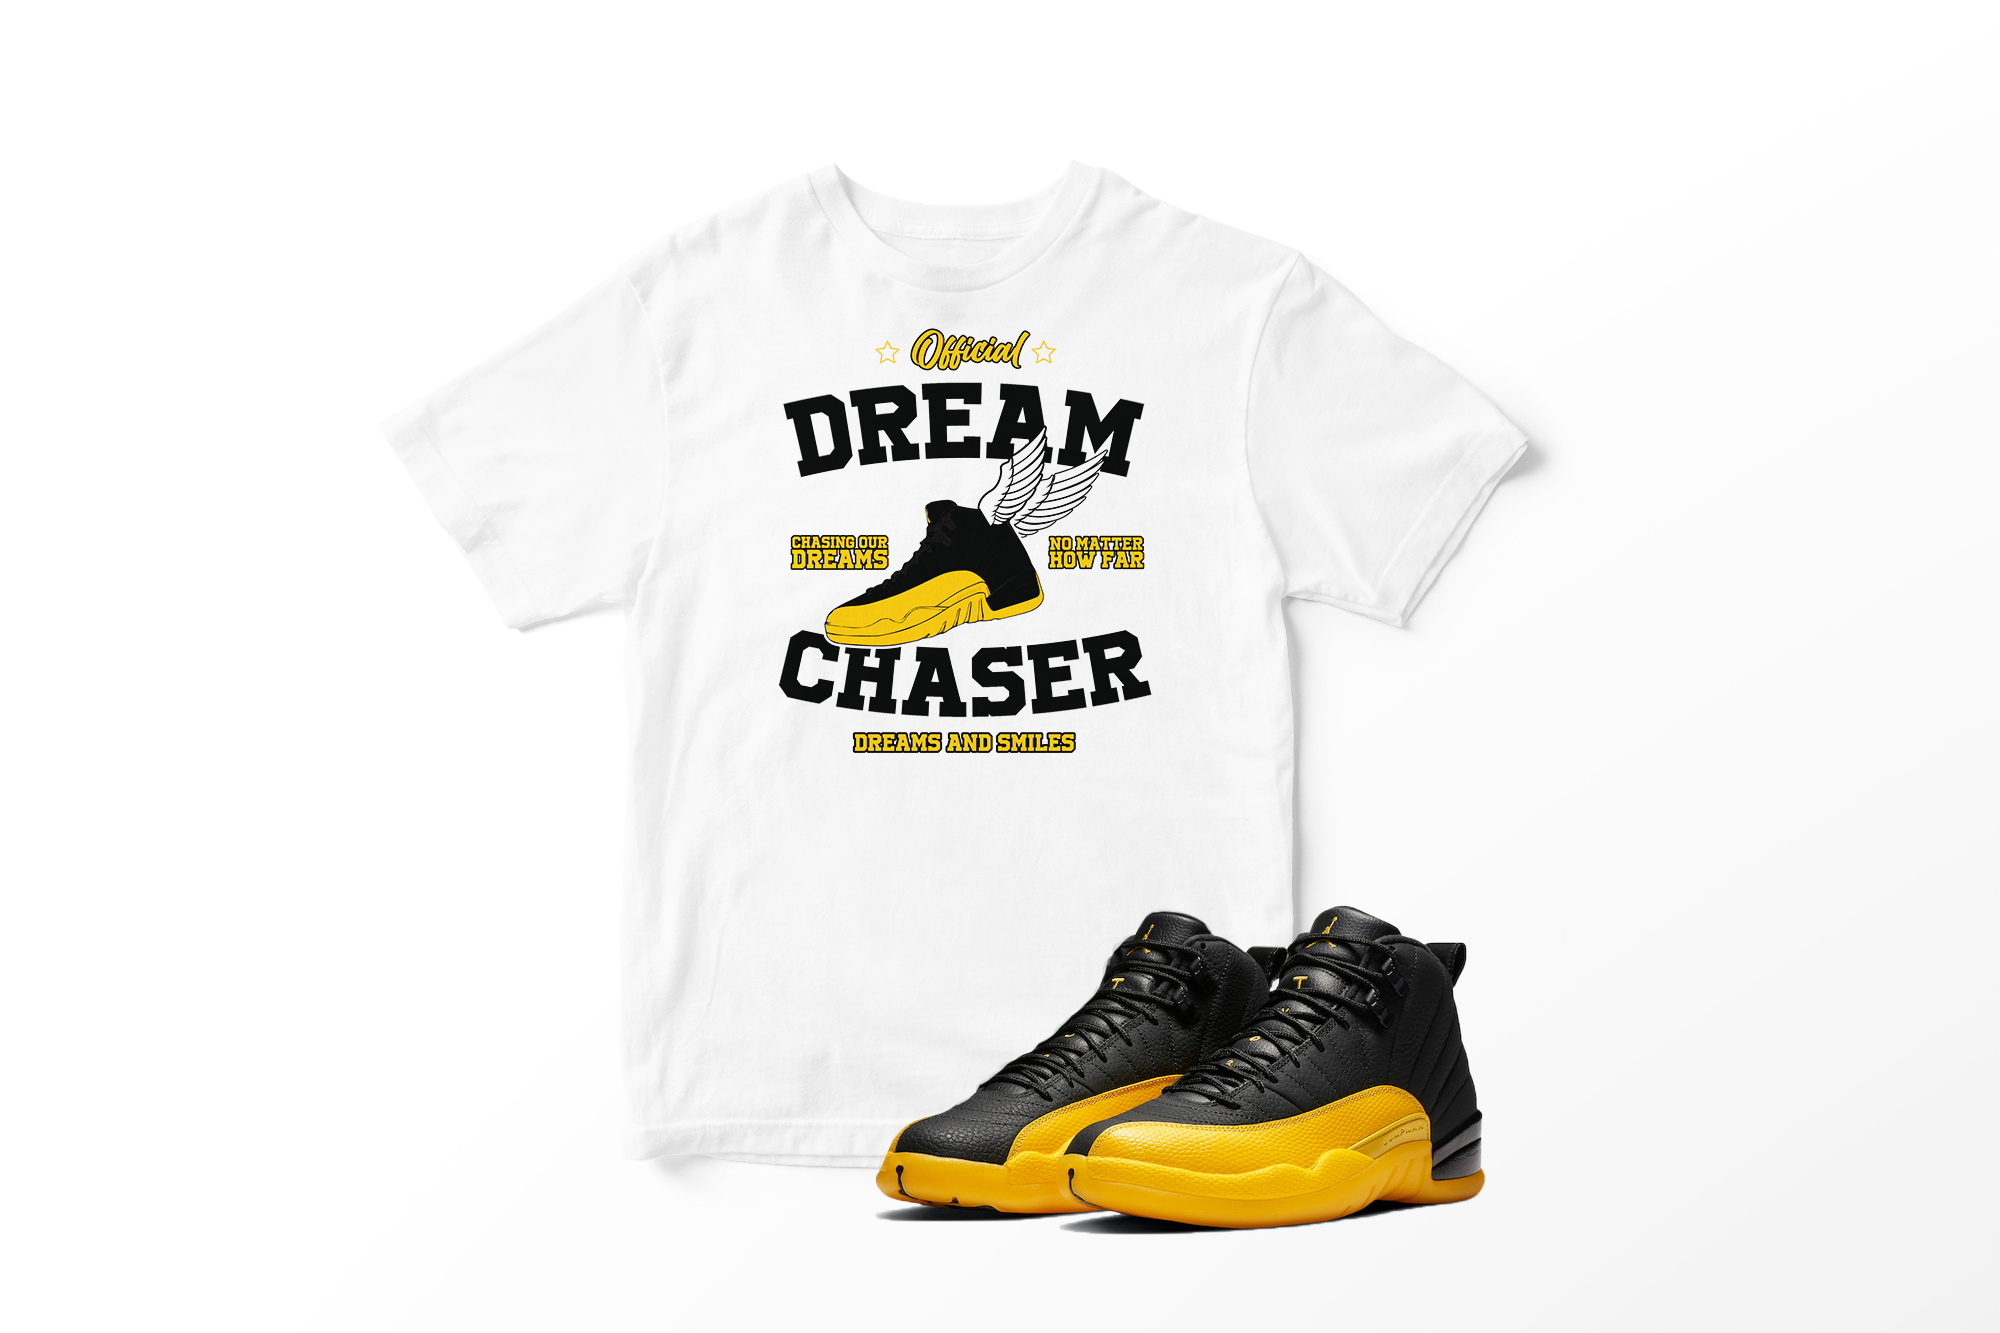 'Official Dream Chaser' in University Gold CW Short Sleeve Tee